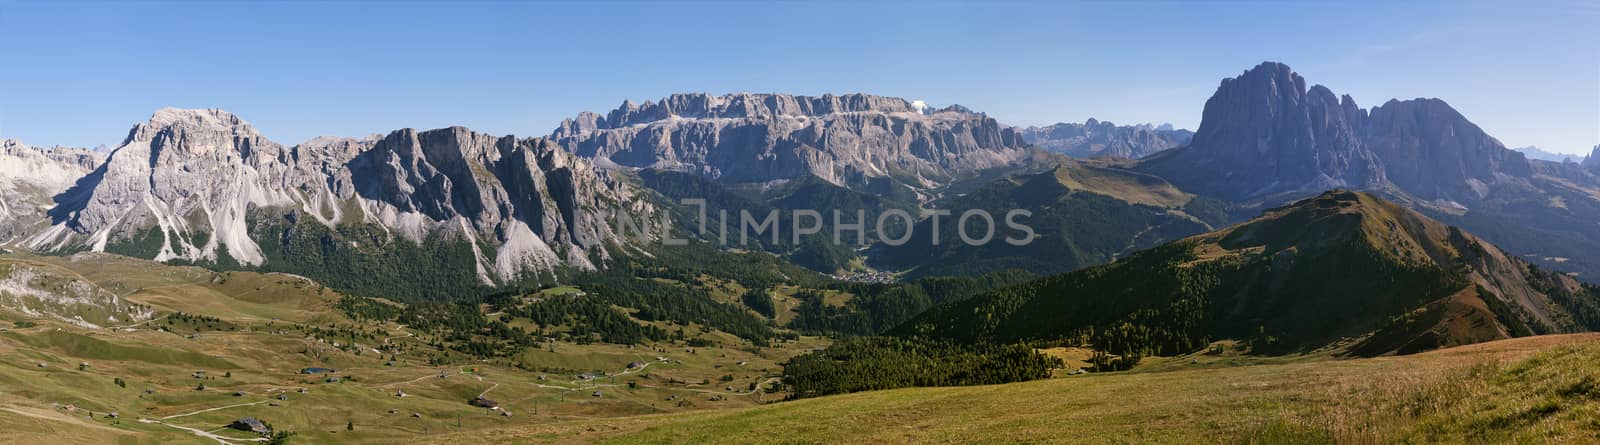 Dolomite Alps, panoramic landscape by Goodday